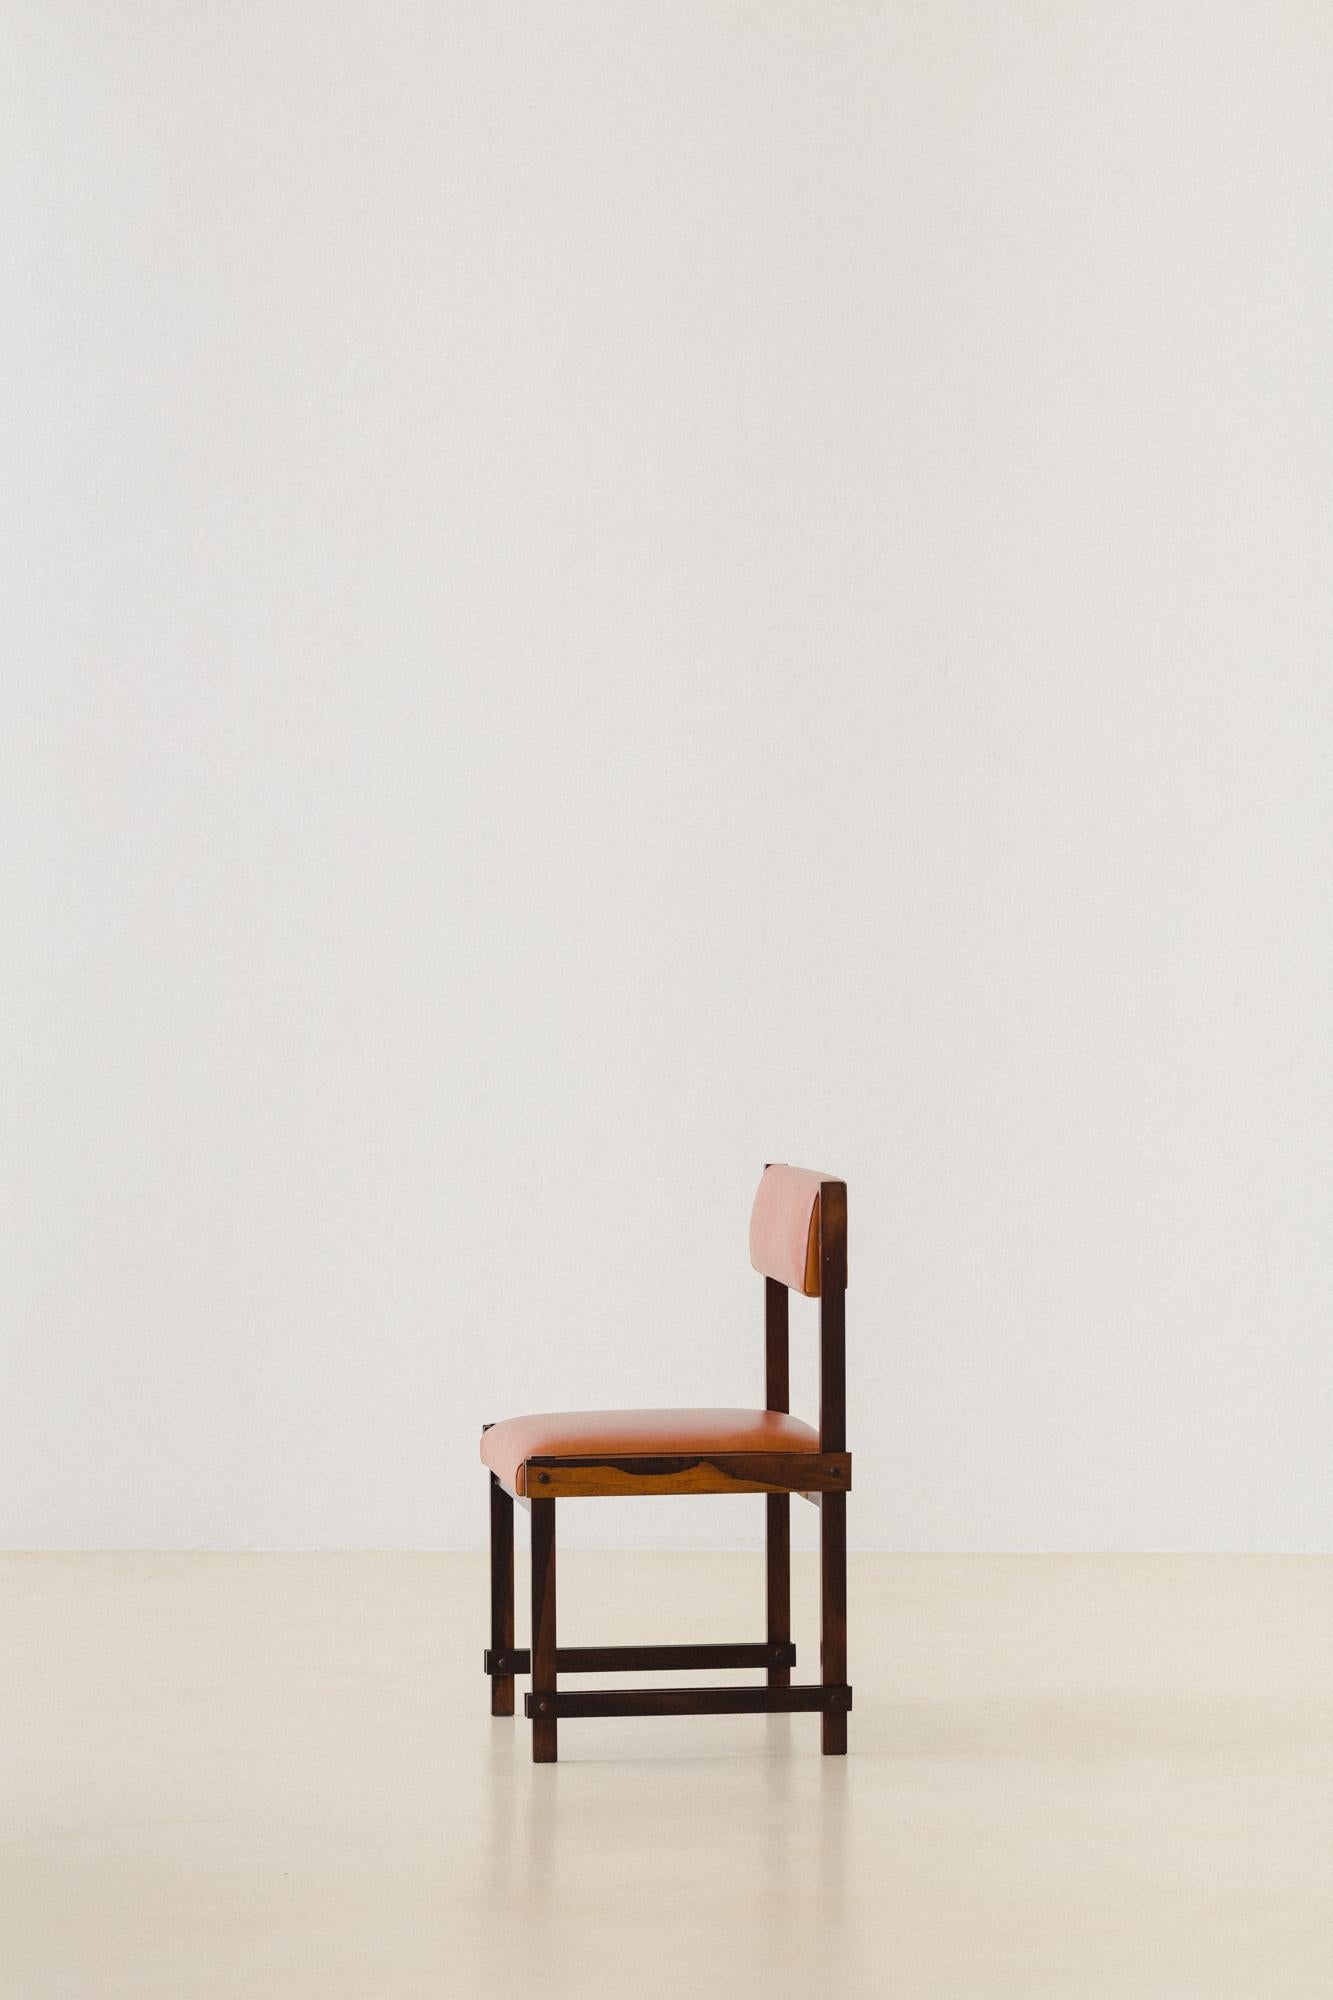 Brazilian Rosewood Dining Chairs by FAI 'Fatima Arquitetura Interiores', 1960s For Sale 1